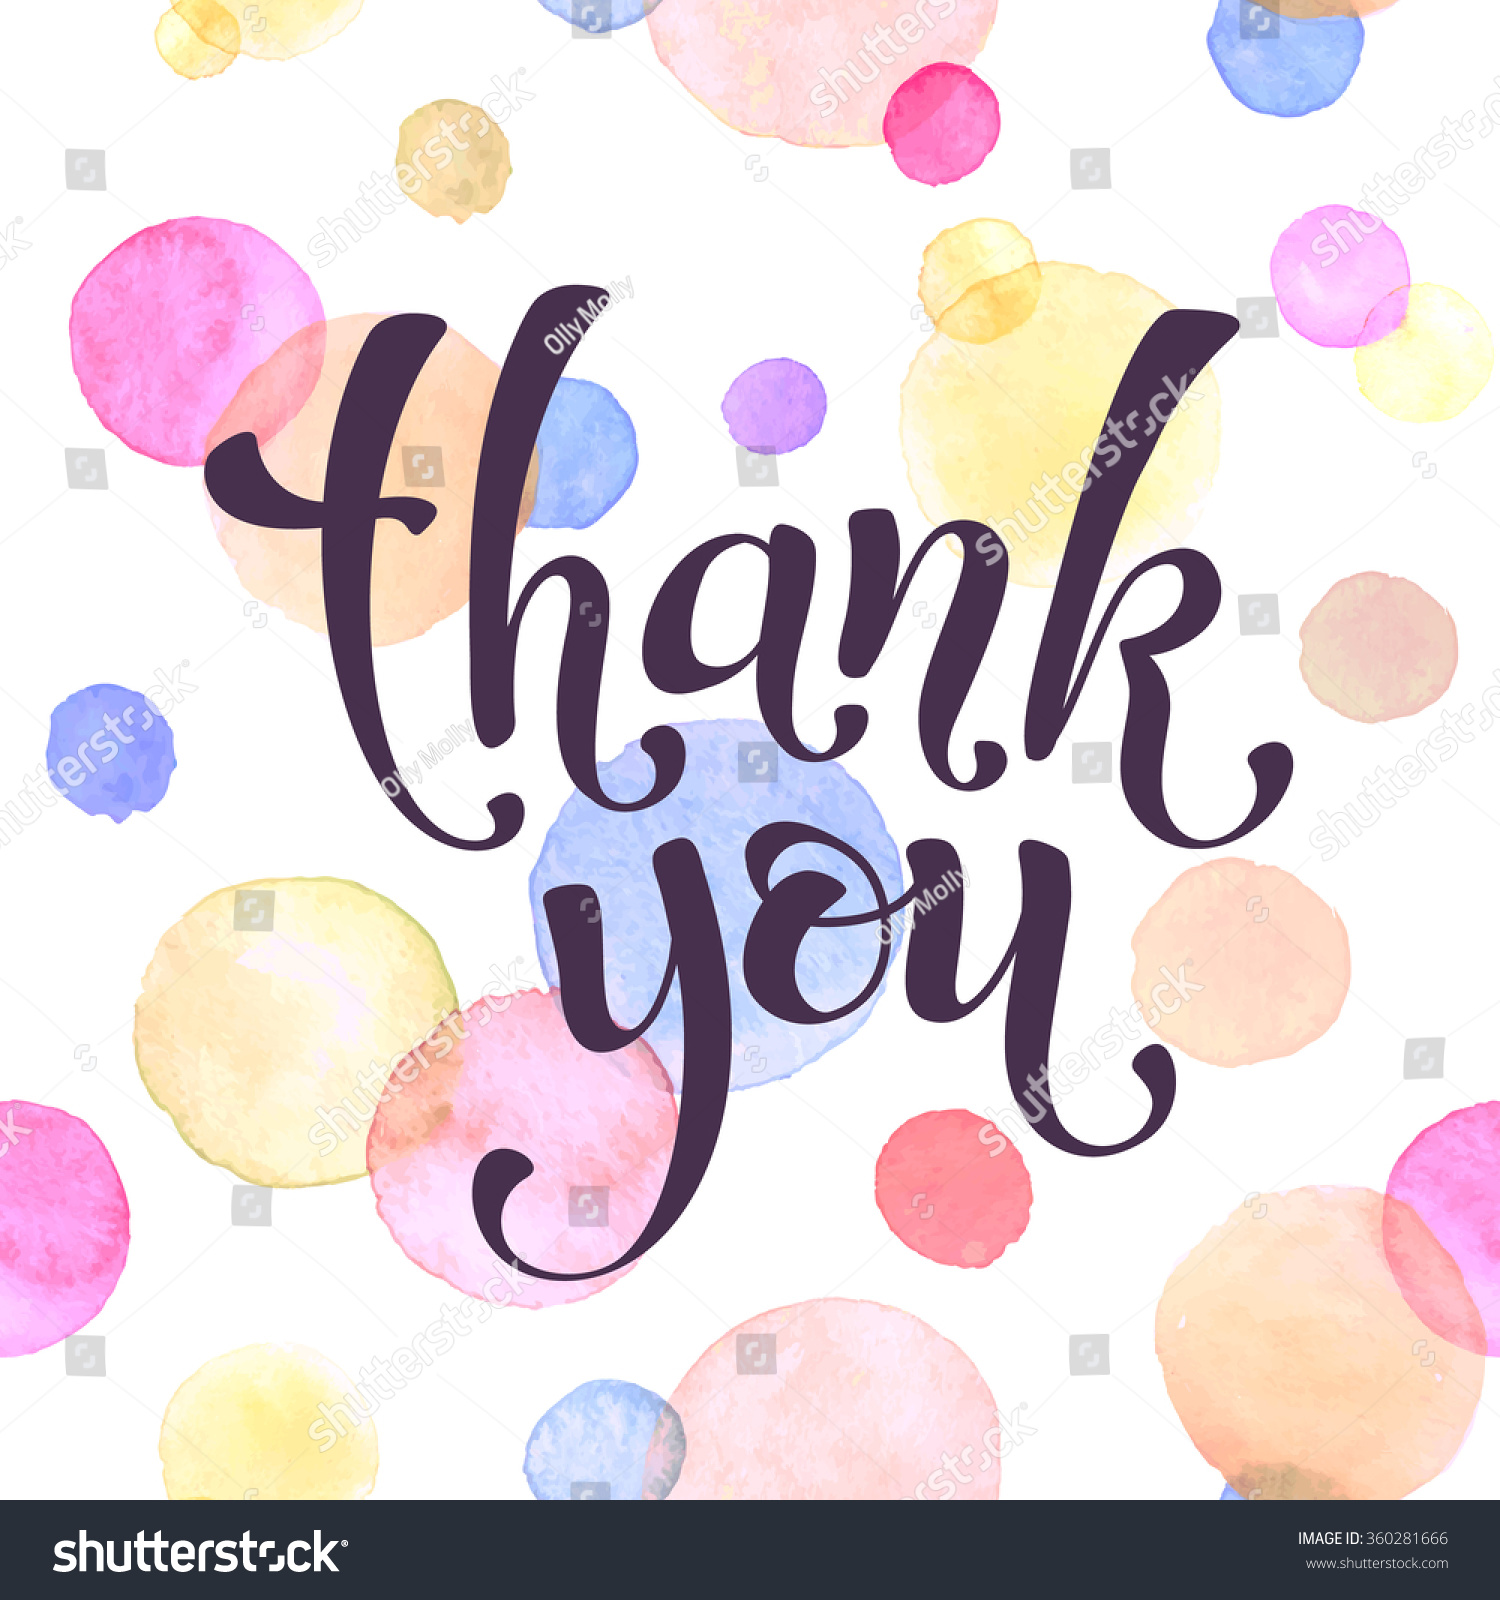 Thank You Lettering Watercolor Spots On Stock Vector (Royalty Free ...